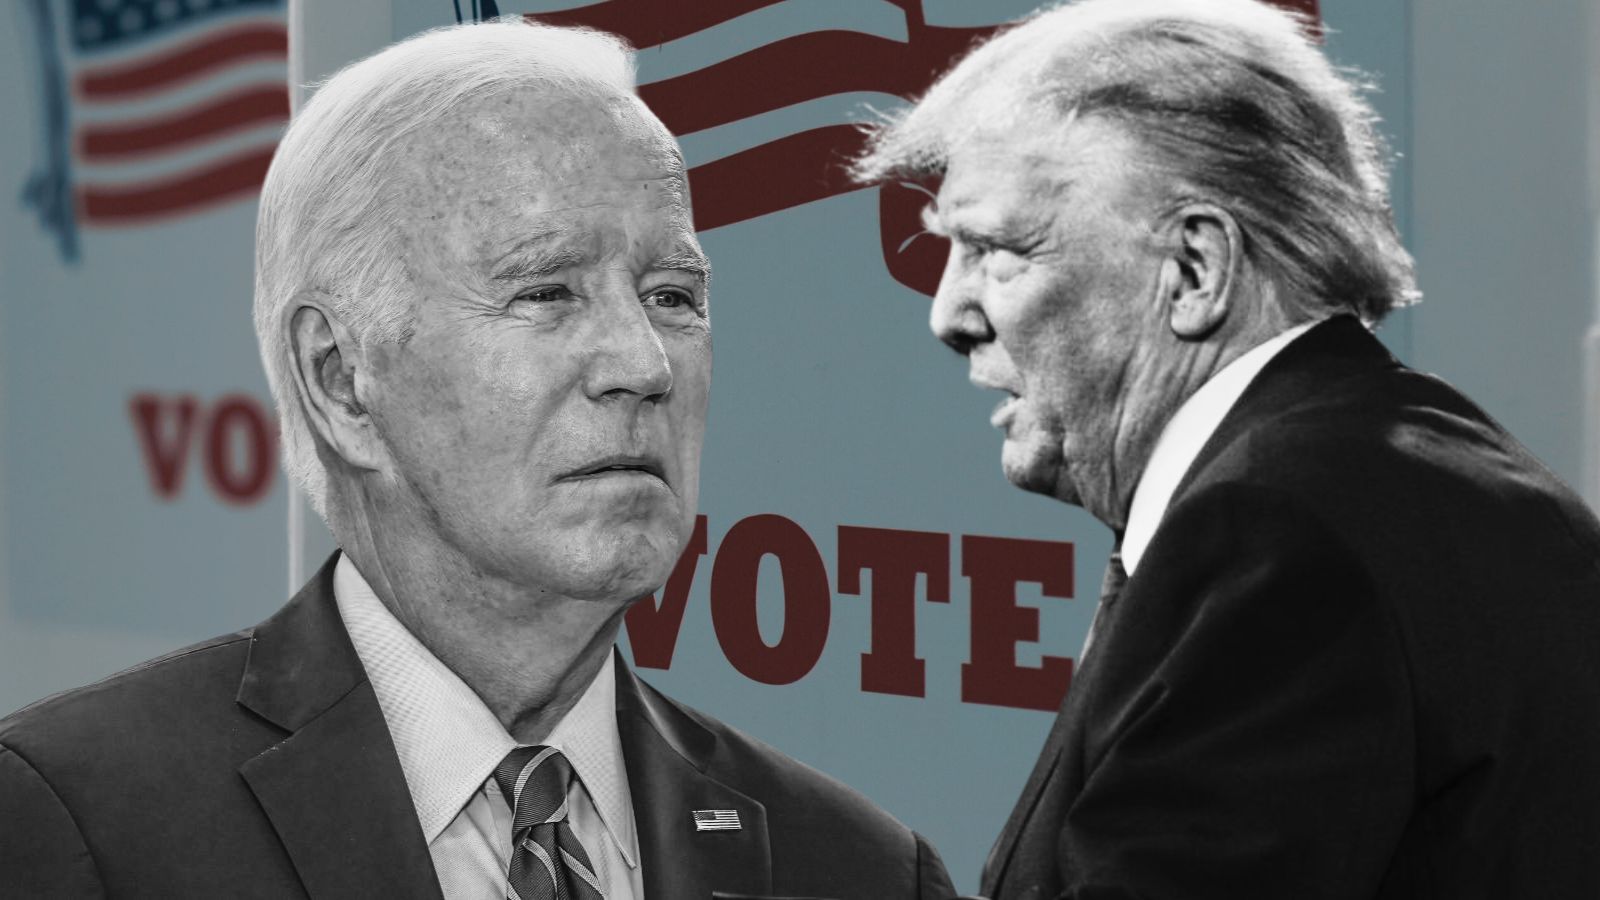 “I Am Really Fearing for Our Democracy”: A Biden-Trump Rematch Isn’t Favorable. Could a Third Party Save the Day?